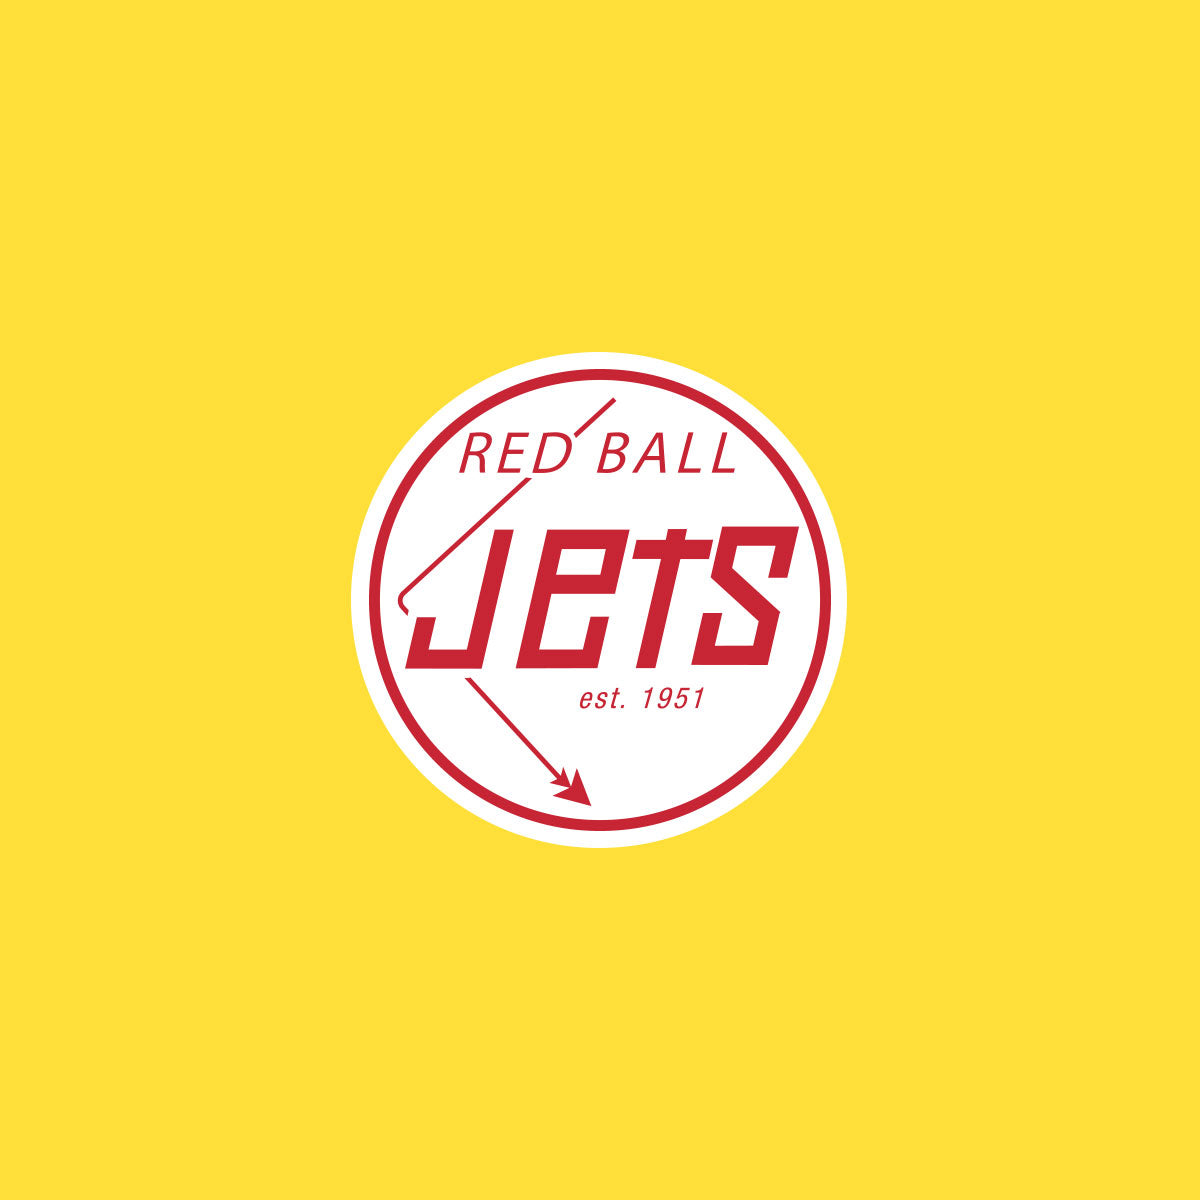 Red Ball Jets